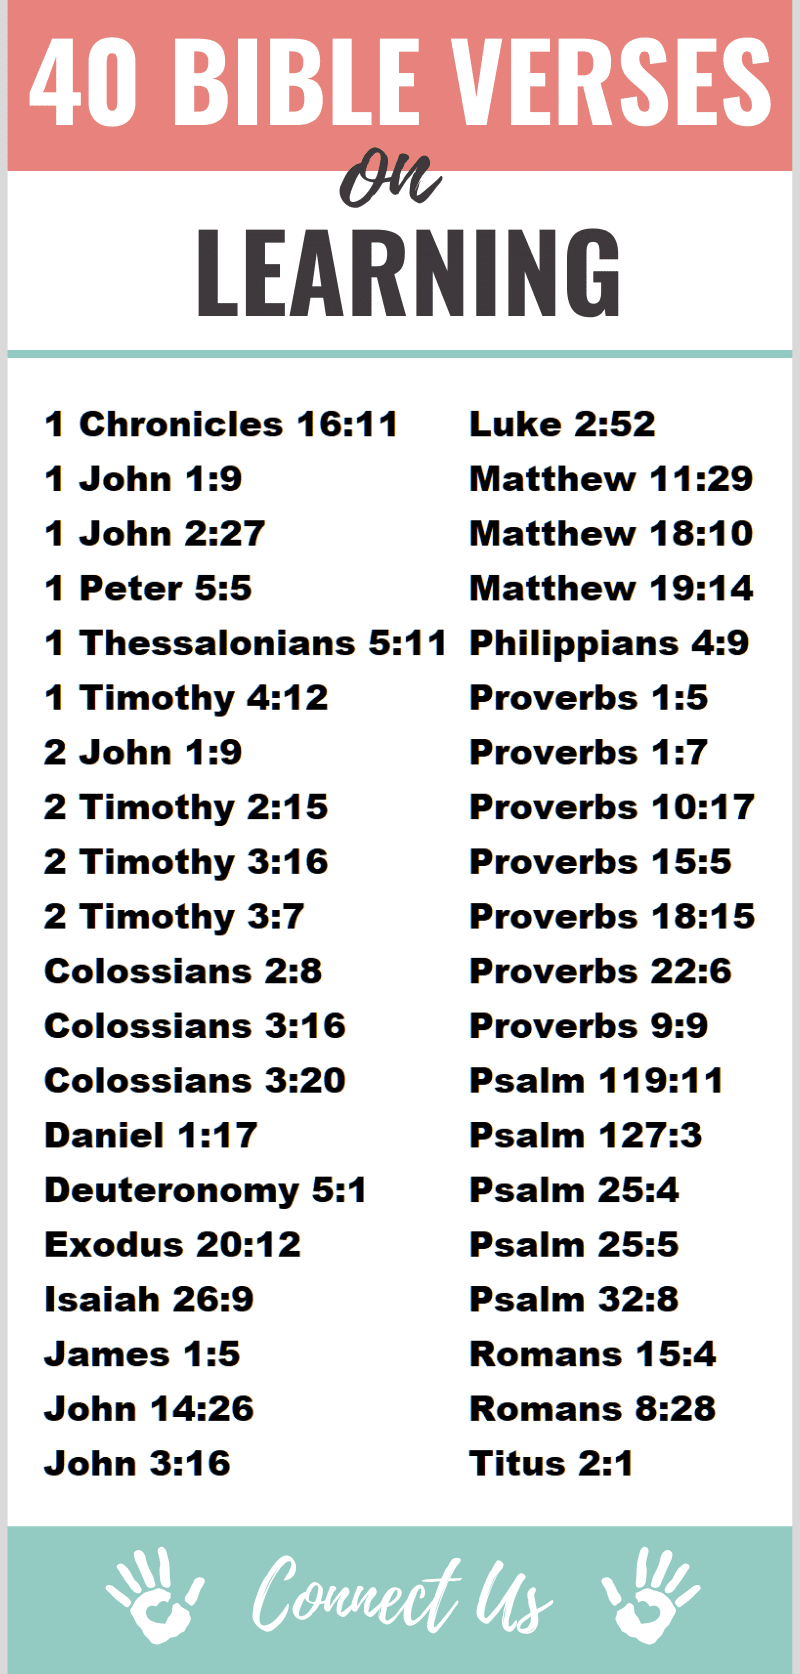 Bible Verses on Learning